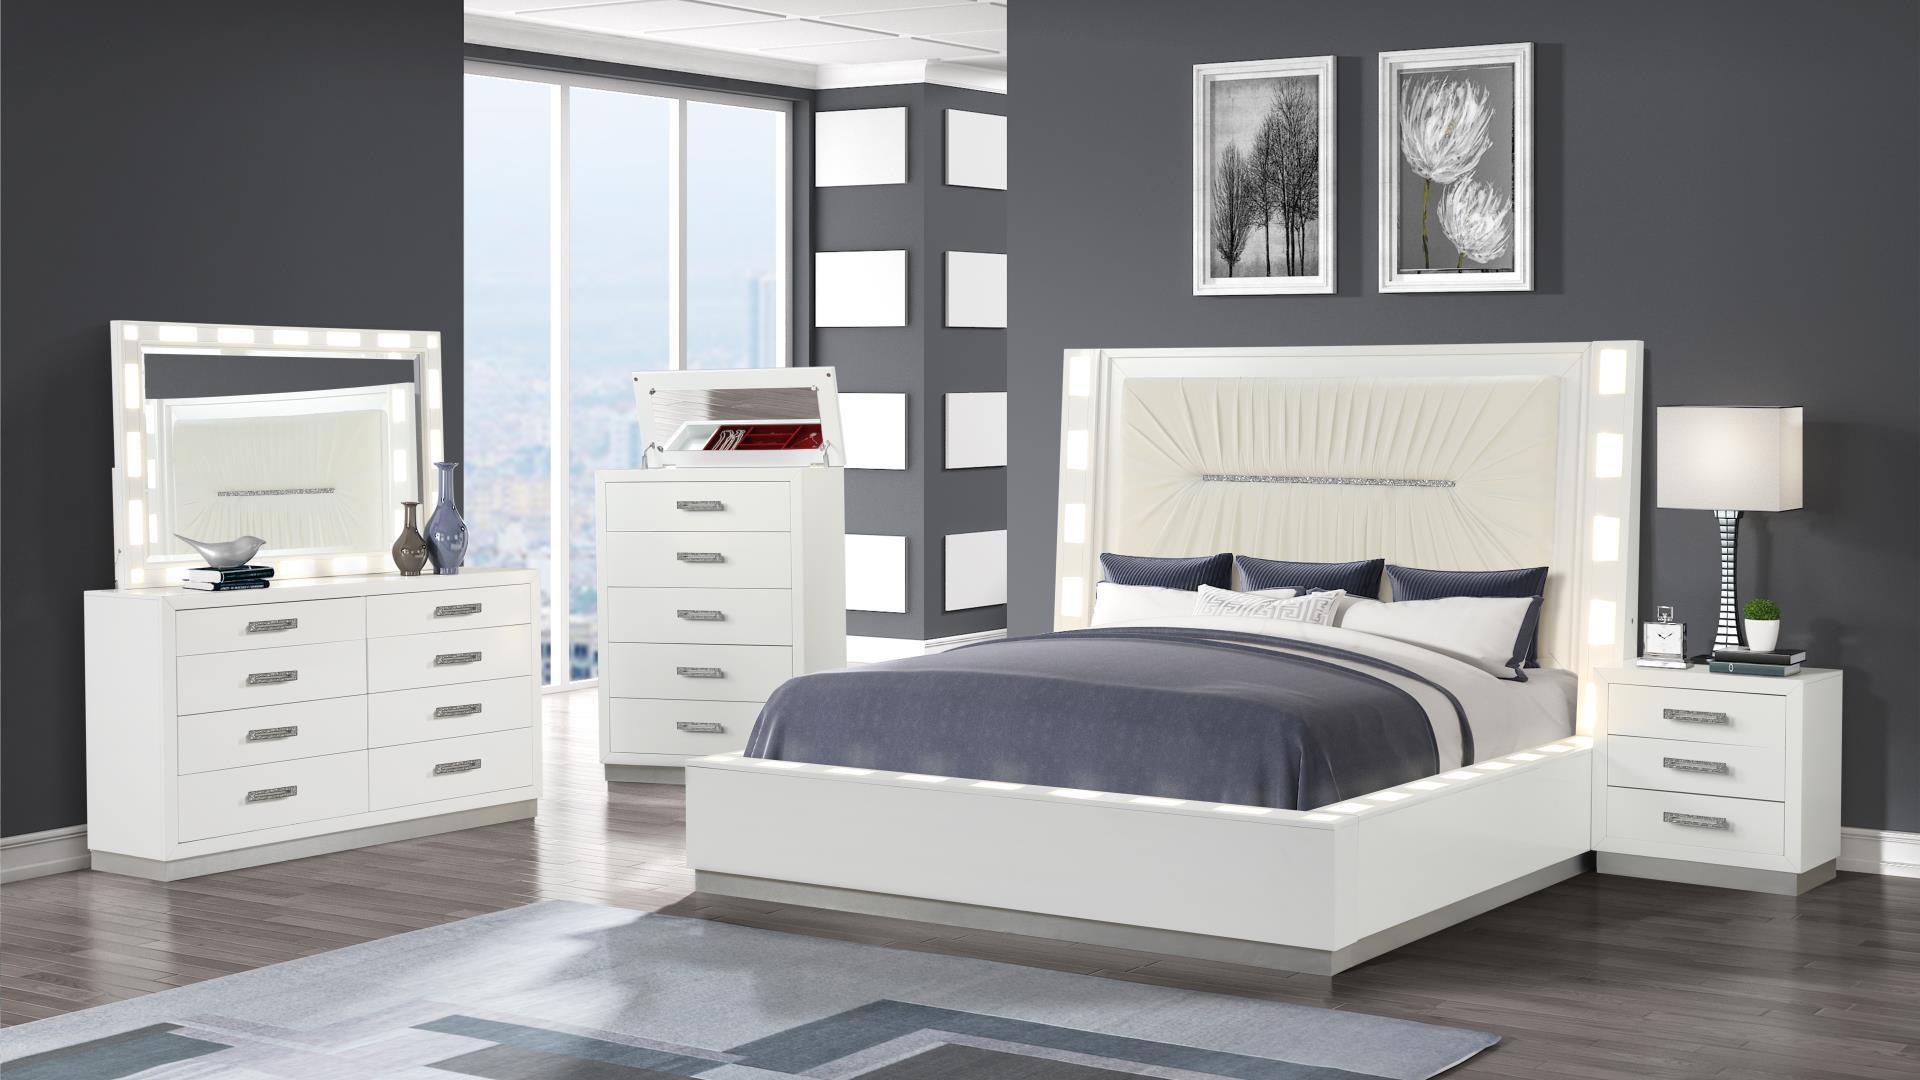 

    
Milky White Solid Wood King Bed Set 4Pcs COCO Galaxy Home Modern Contemporary
